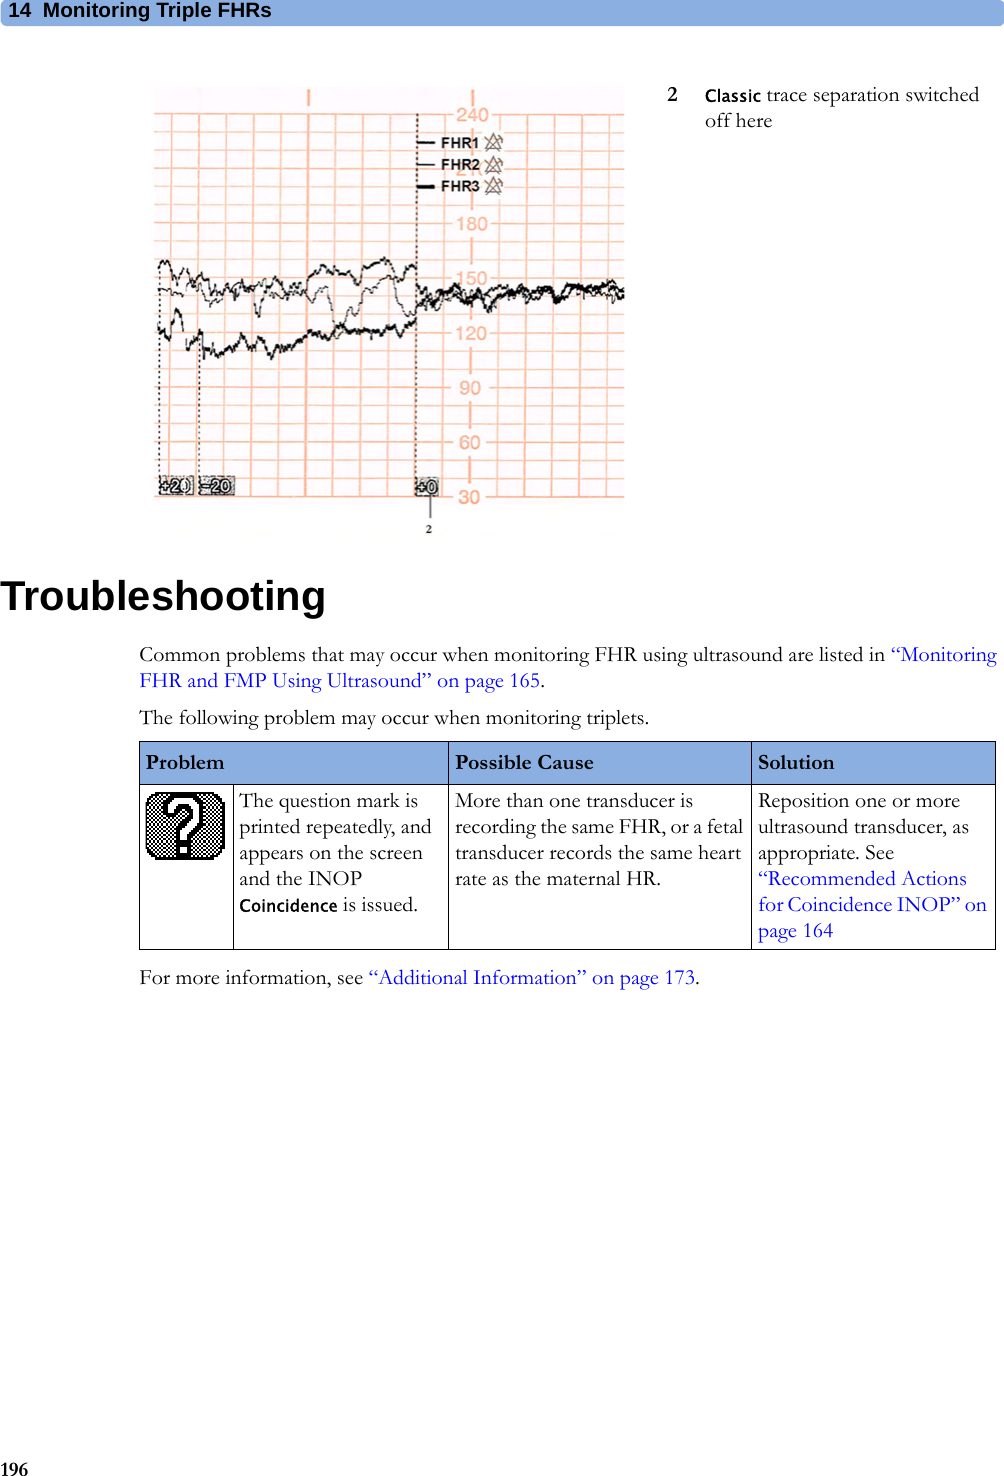 14  Monitoring Triple FHRs196TroubleshootingCommon problems that may occur when monitoring FHR using ultrasound are listed in “Monitoring FHR and FMP Using Ultrasound” on page 165.The following problem may occur when monitoring triplets.For more information, see “Additional Information” on page 173.2Classic trace separation switched off hereProblem Possible Cause SolutionThe question mark is printed repeatedly, and appears on the screen and the INOP Coincidence is issued.More than one transducer is recording the same FHR, or a fetal transducer records the same heart rate as the maternal HR.Reposition one or more ultrasound transducer, as appropriate. See “Recommended Actions for Coincidence INOP” on page 164